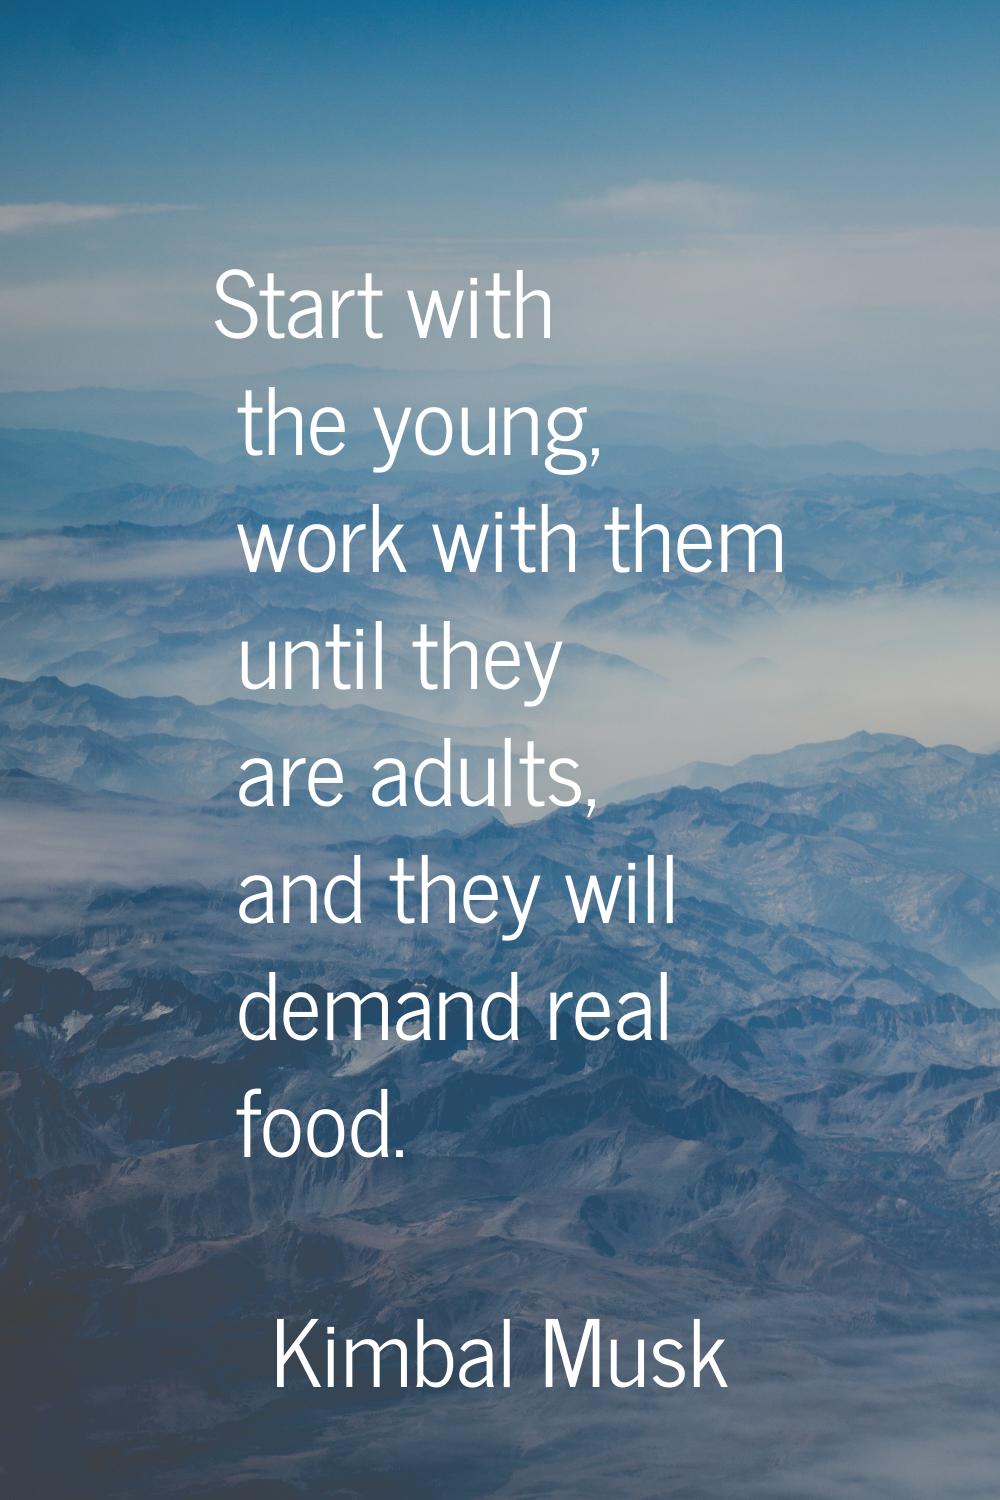 Start with the young, work with them until they are adults, and they will demand real food.